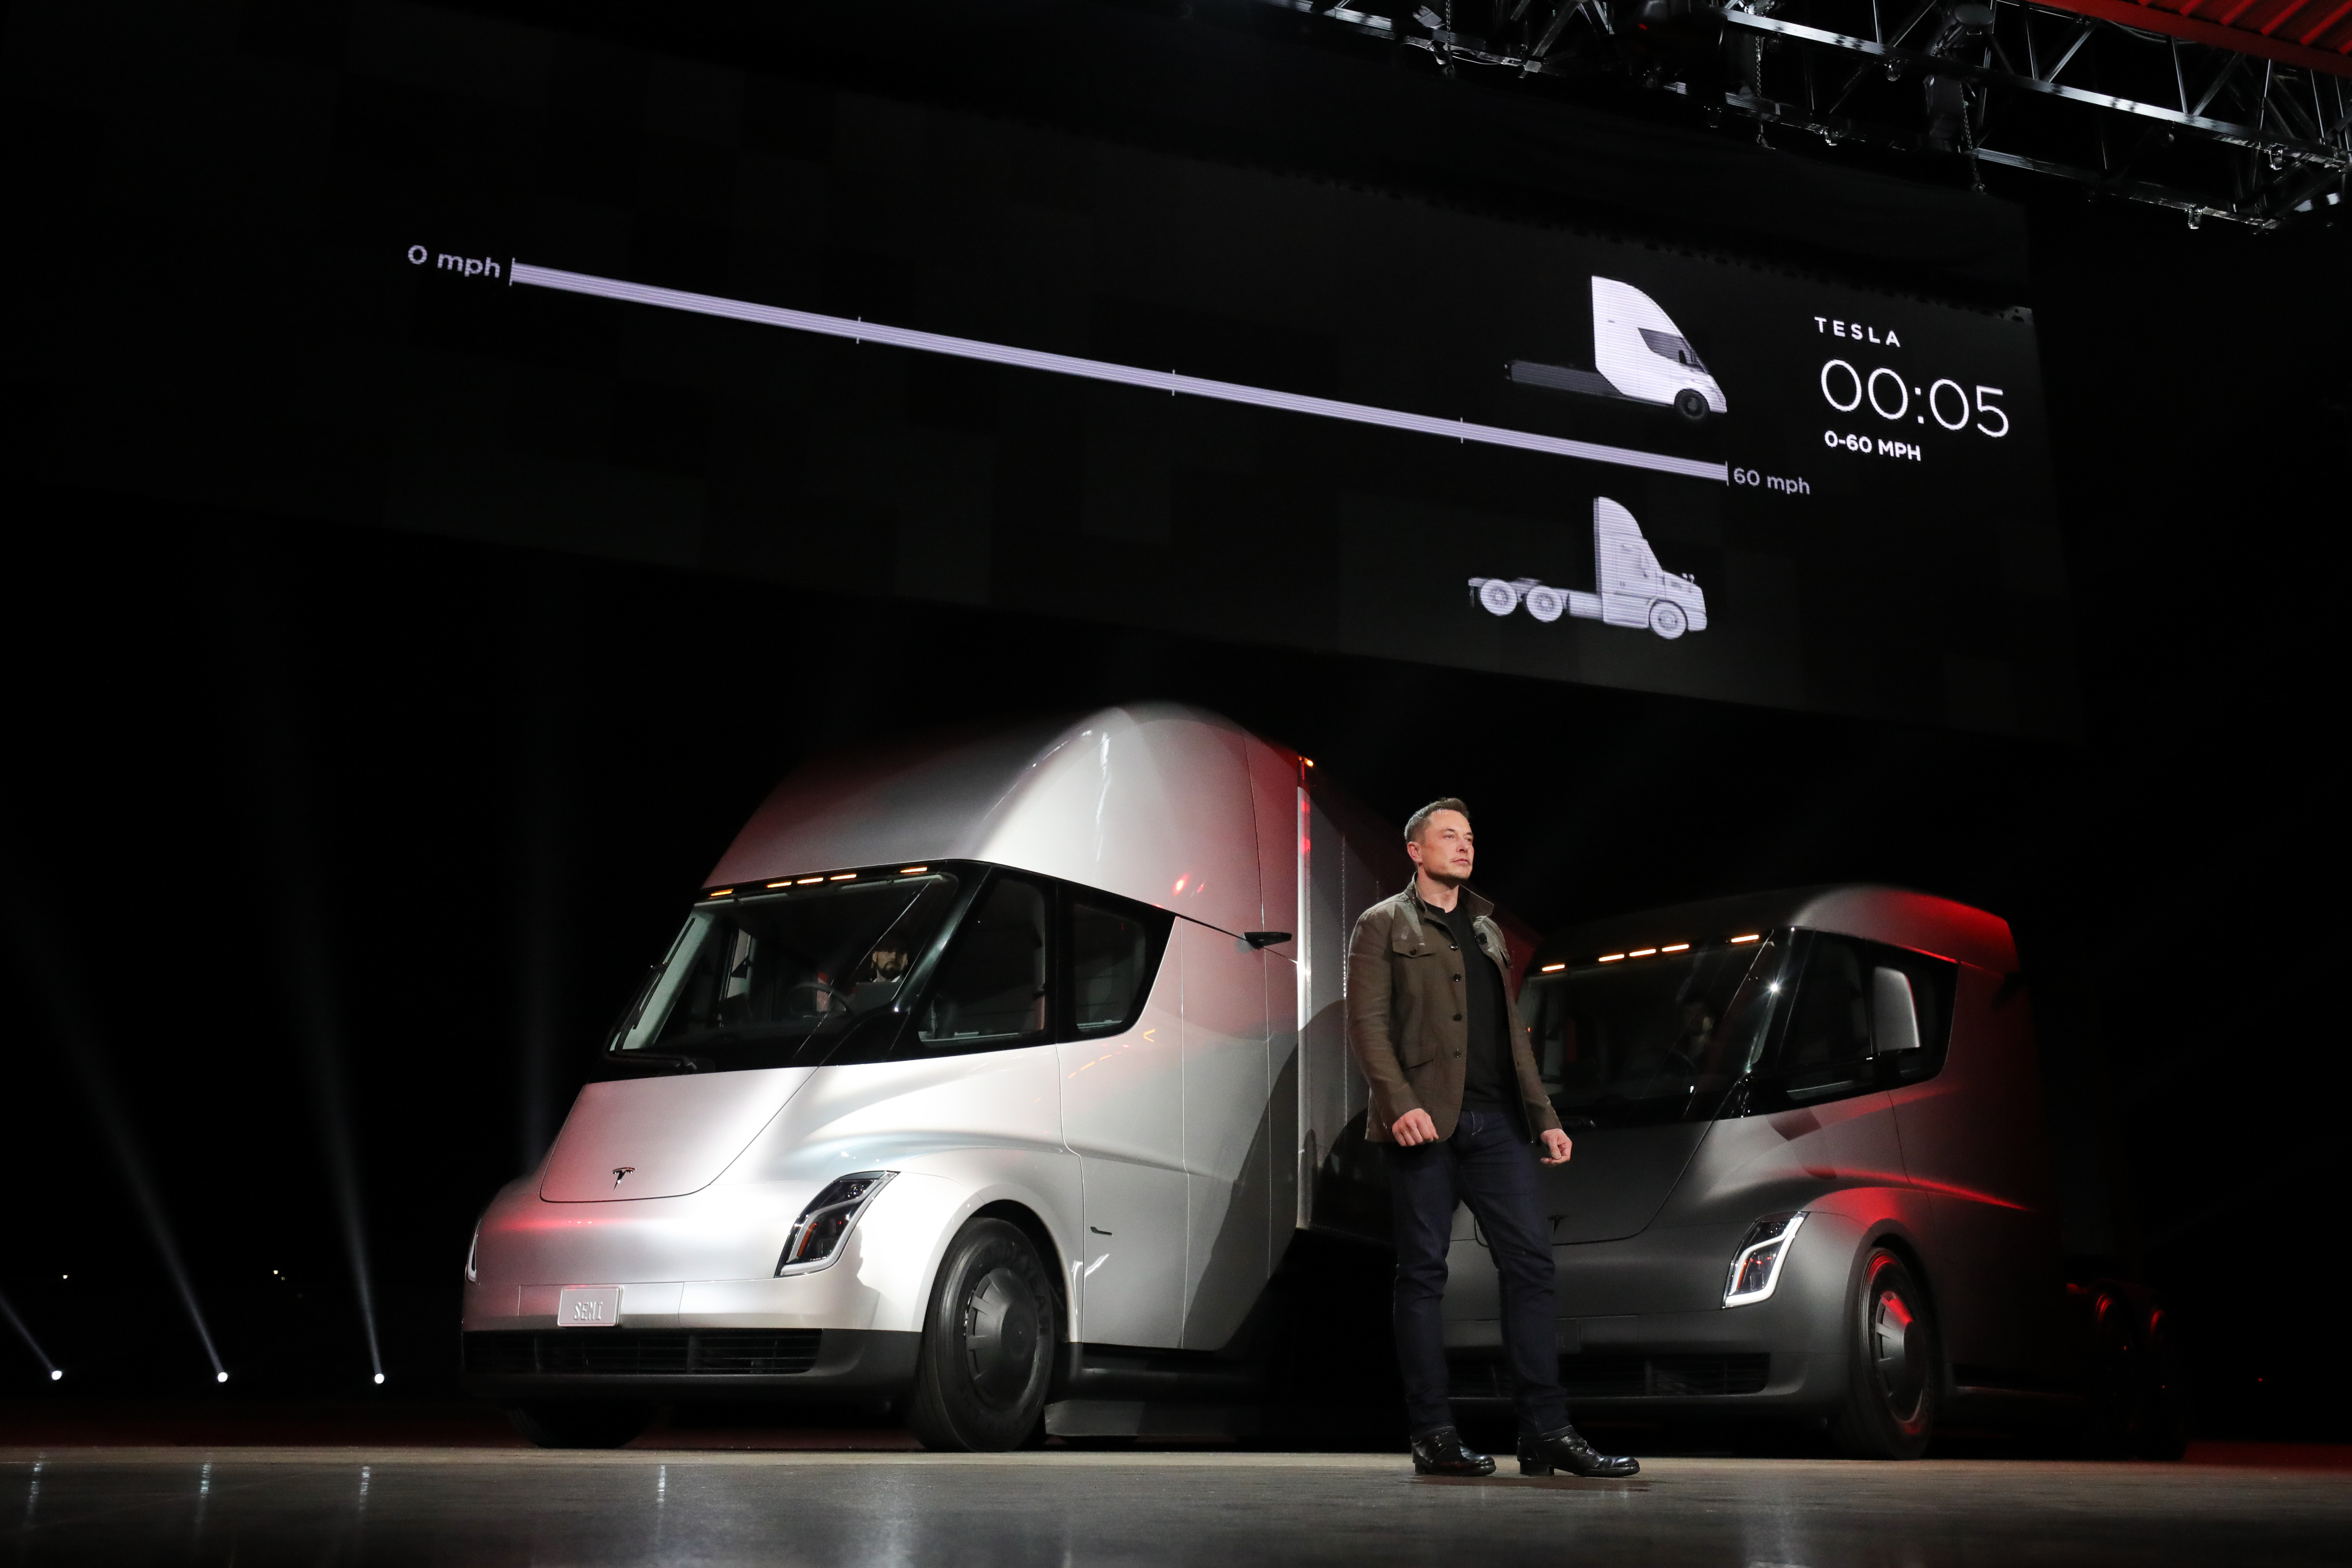 Tesla’s electric Semi truck starts at $150,000, reservations now live